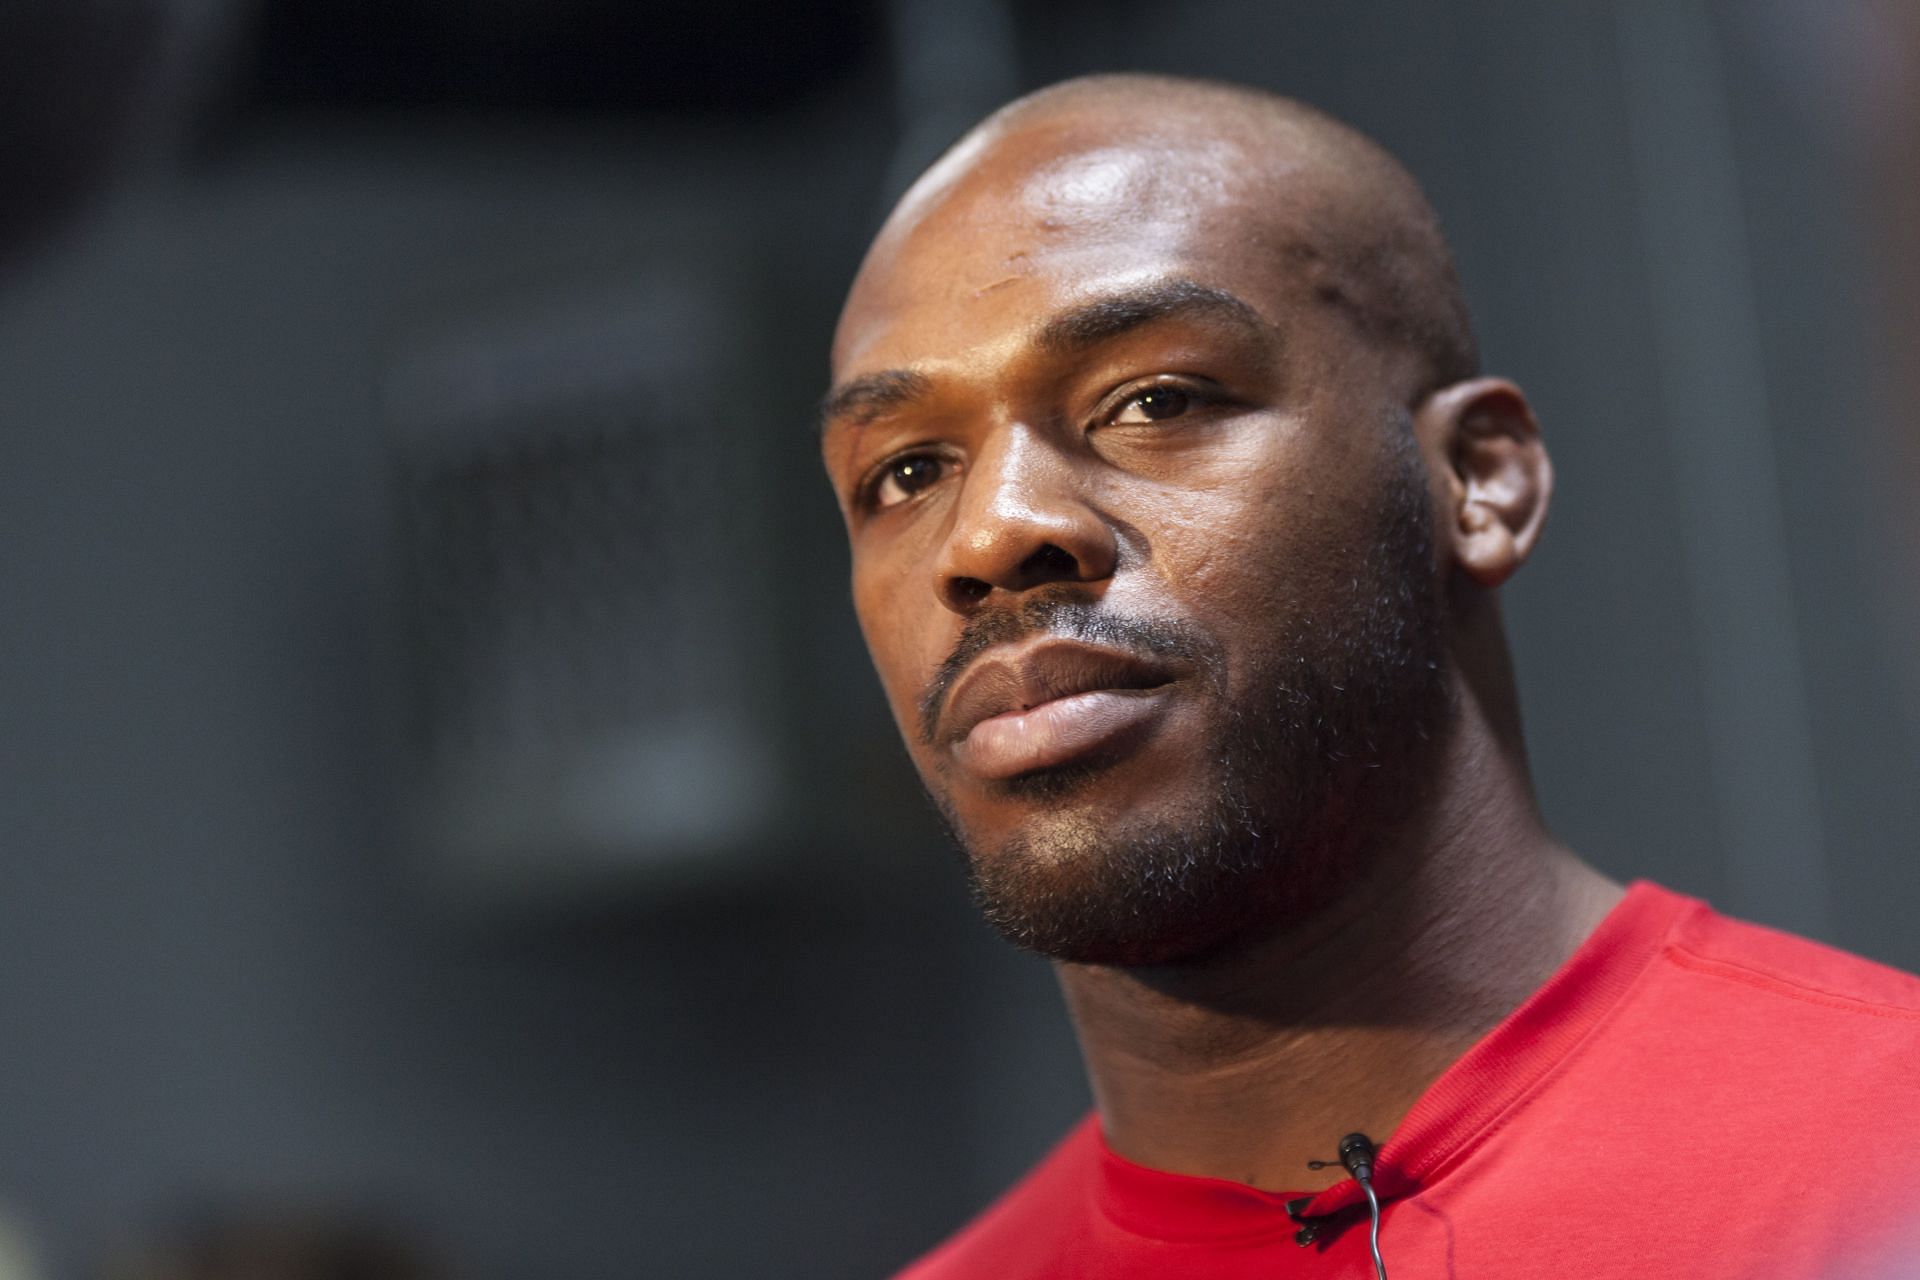 Jon Jones has tested positive for banned substances on numerous occasions